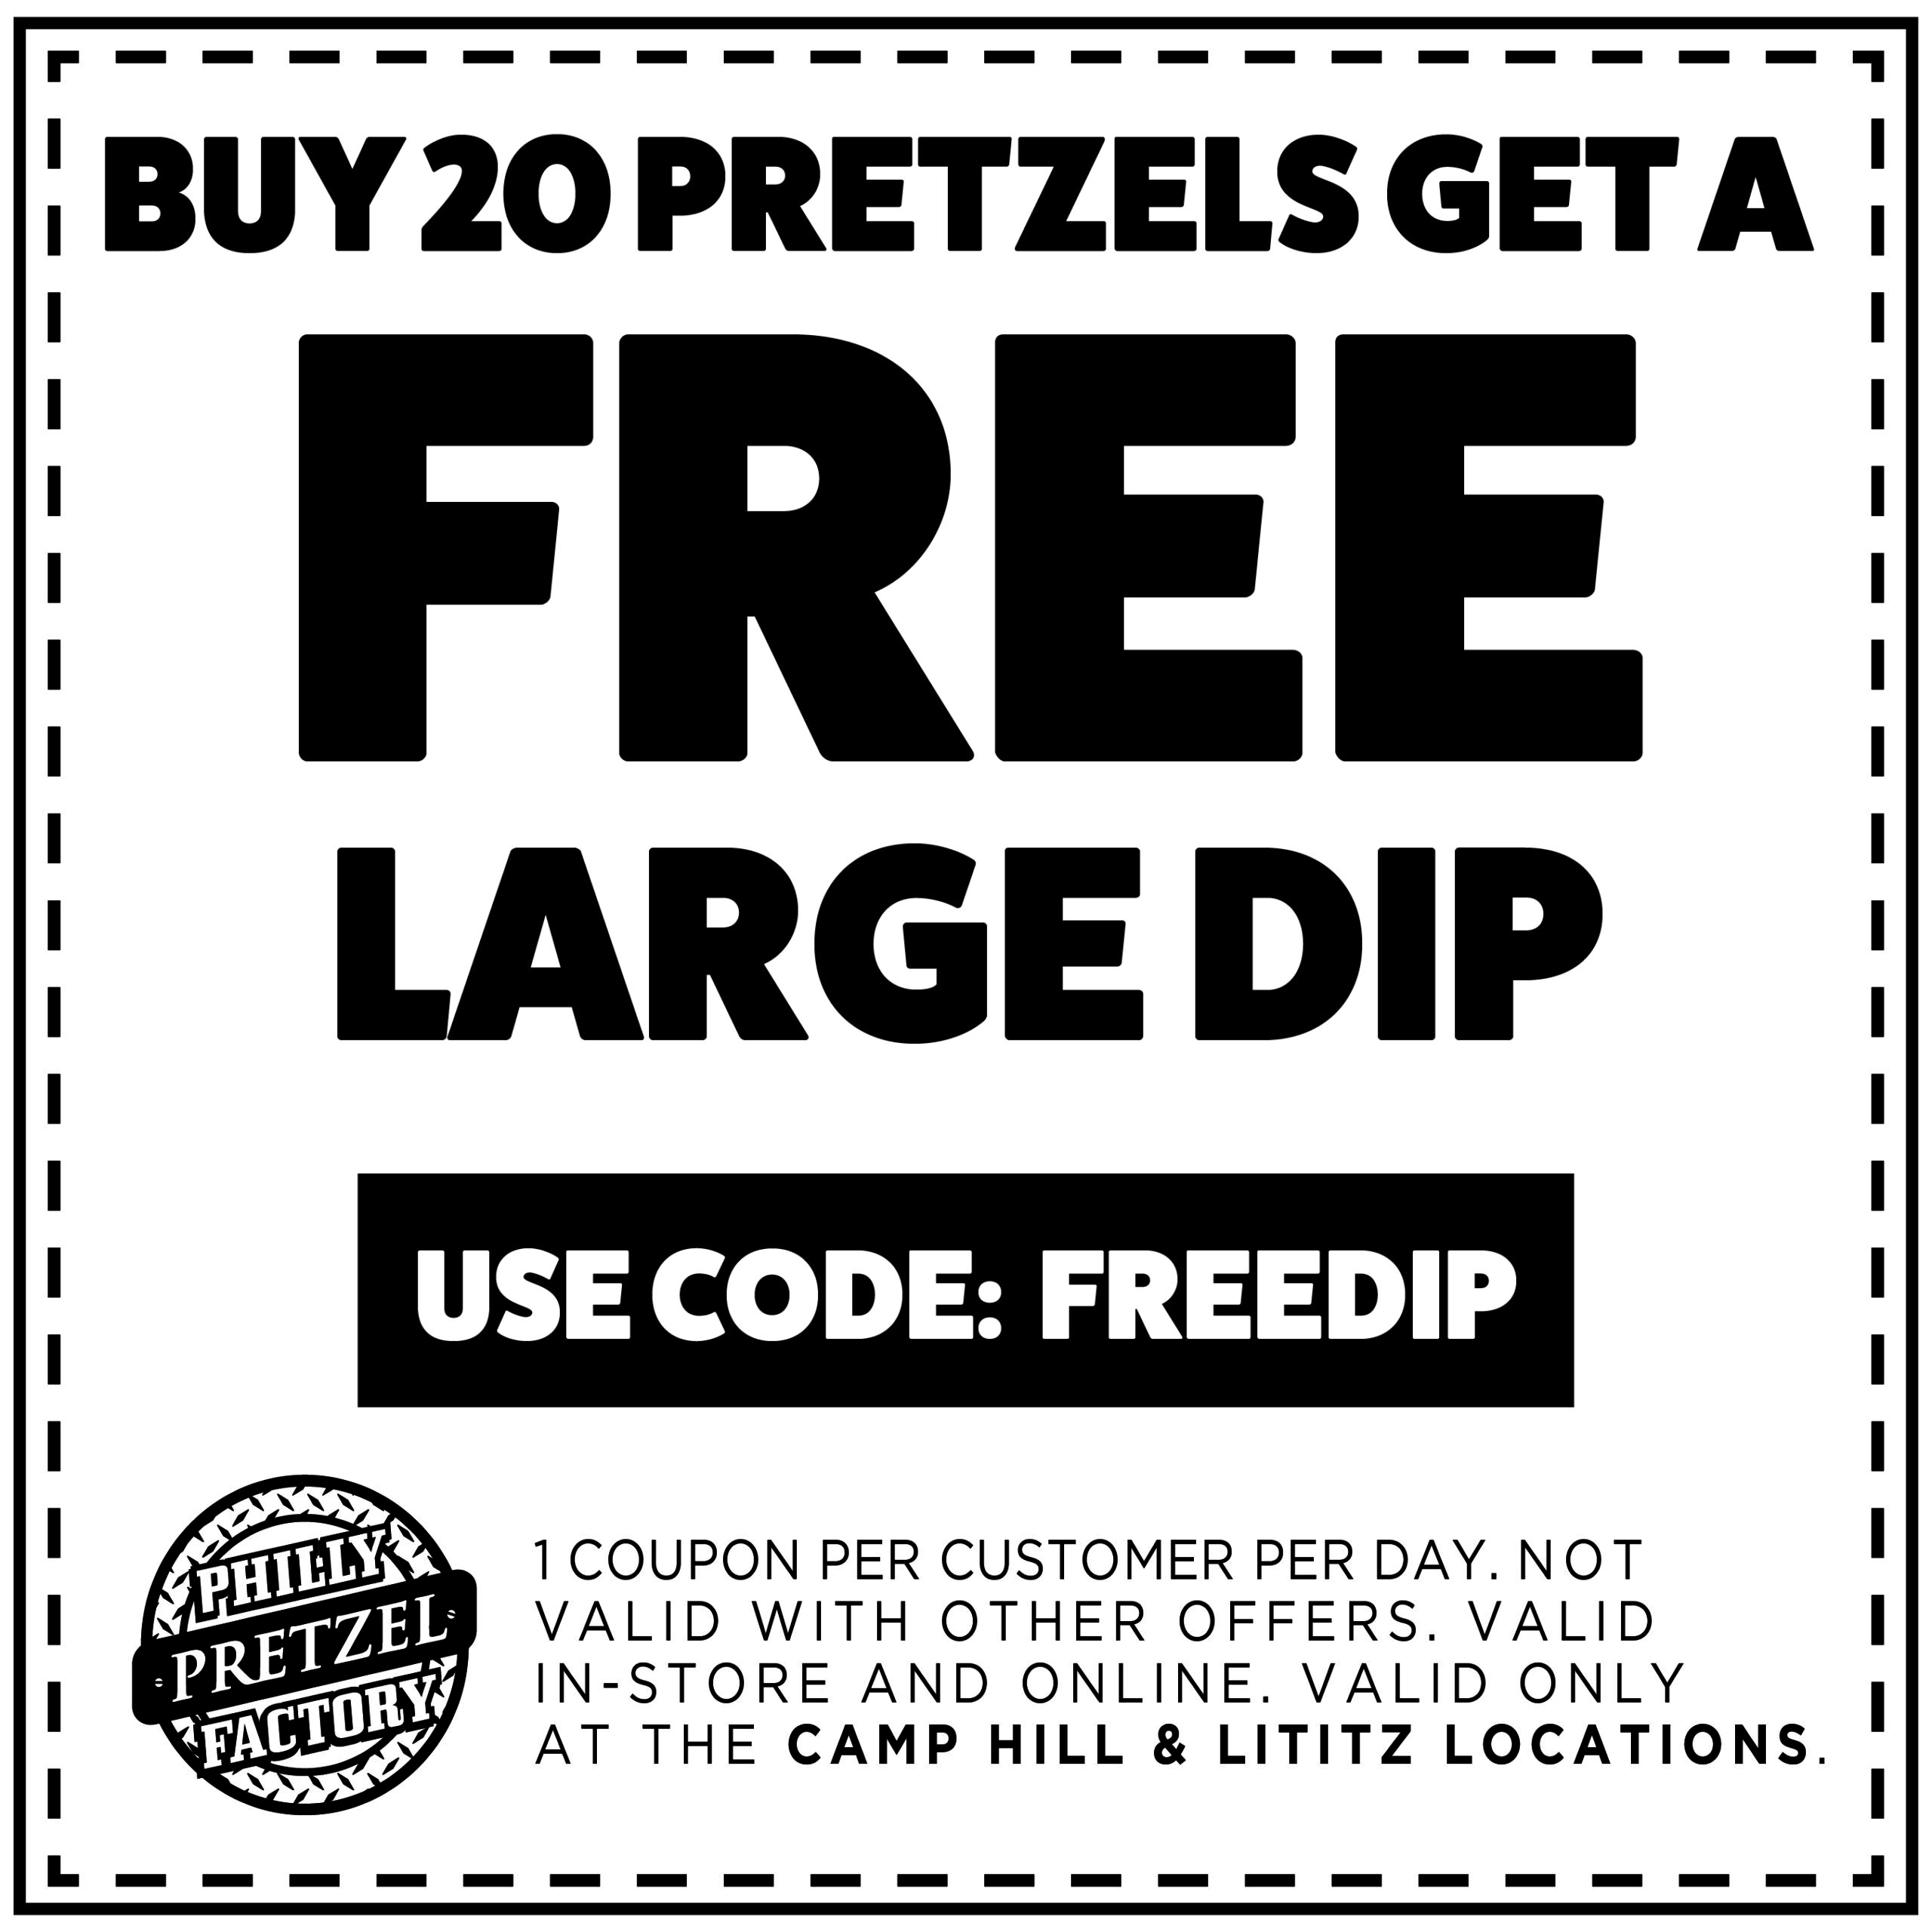 philly pretzel factory printable coupons